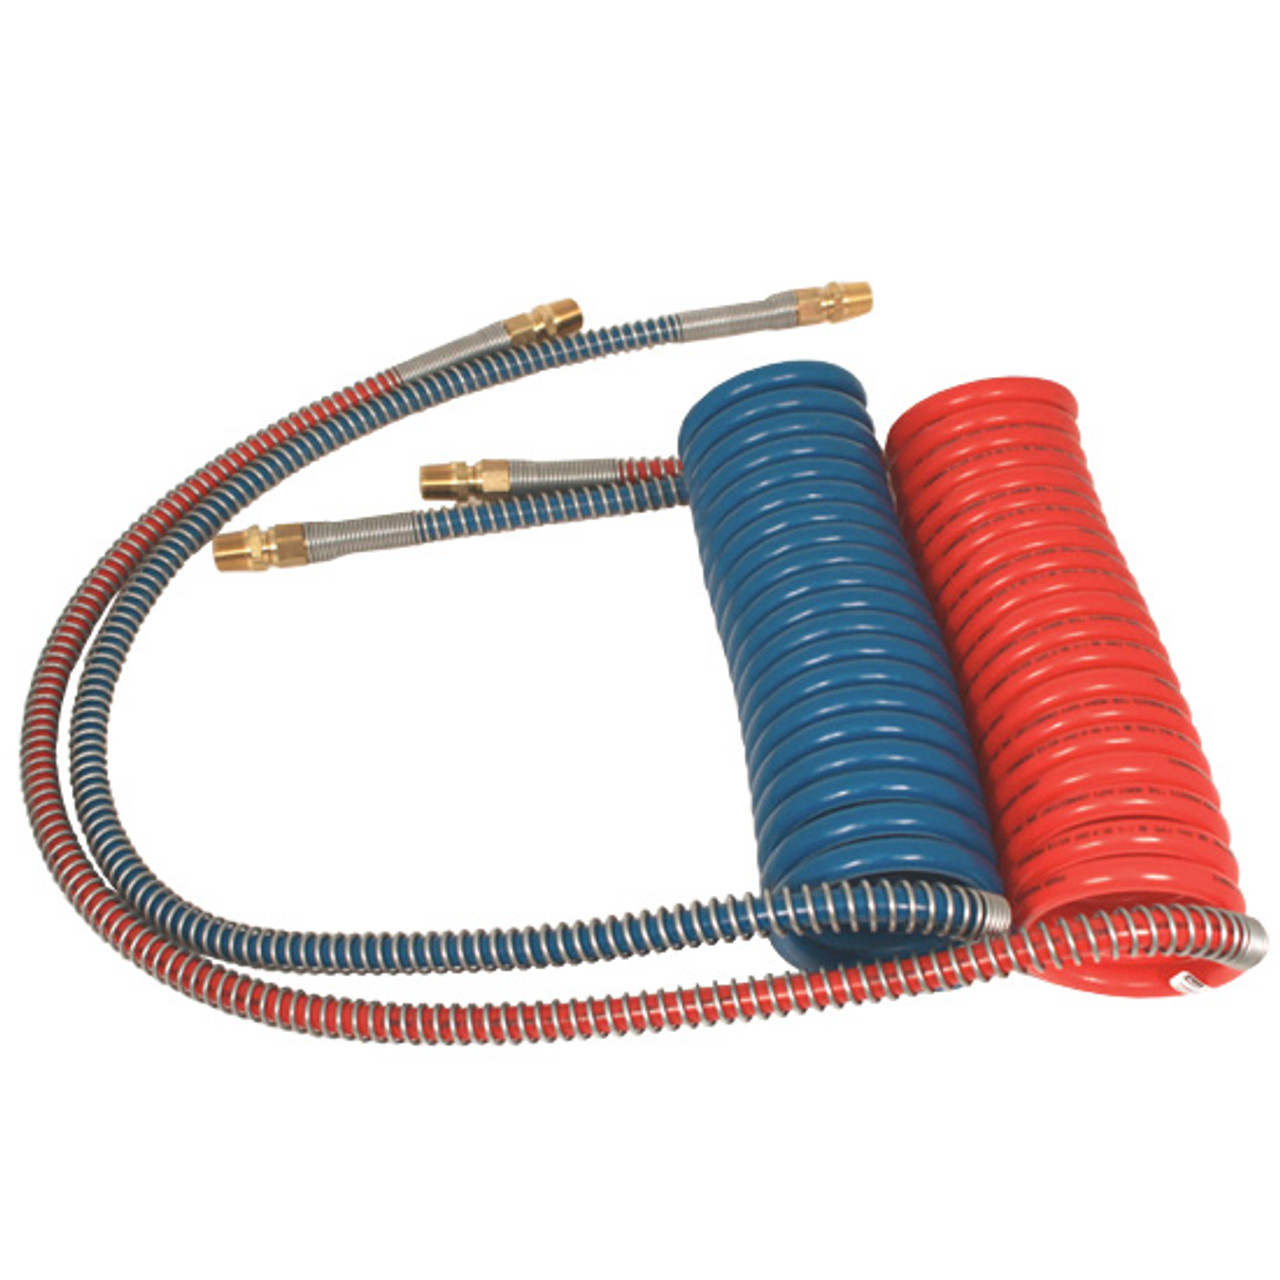 TPHD Nylon 15 Foot Coiled Air Hose Set - Red/Blue With 1 - 40 Inch, 1 - 12  Inch Lead - Set Of 10 - Elite Truck Accessories